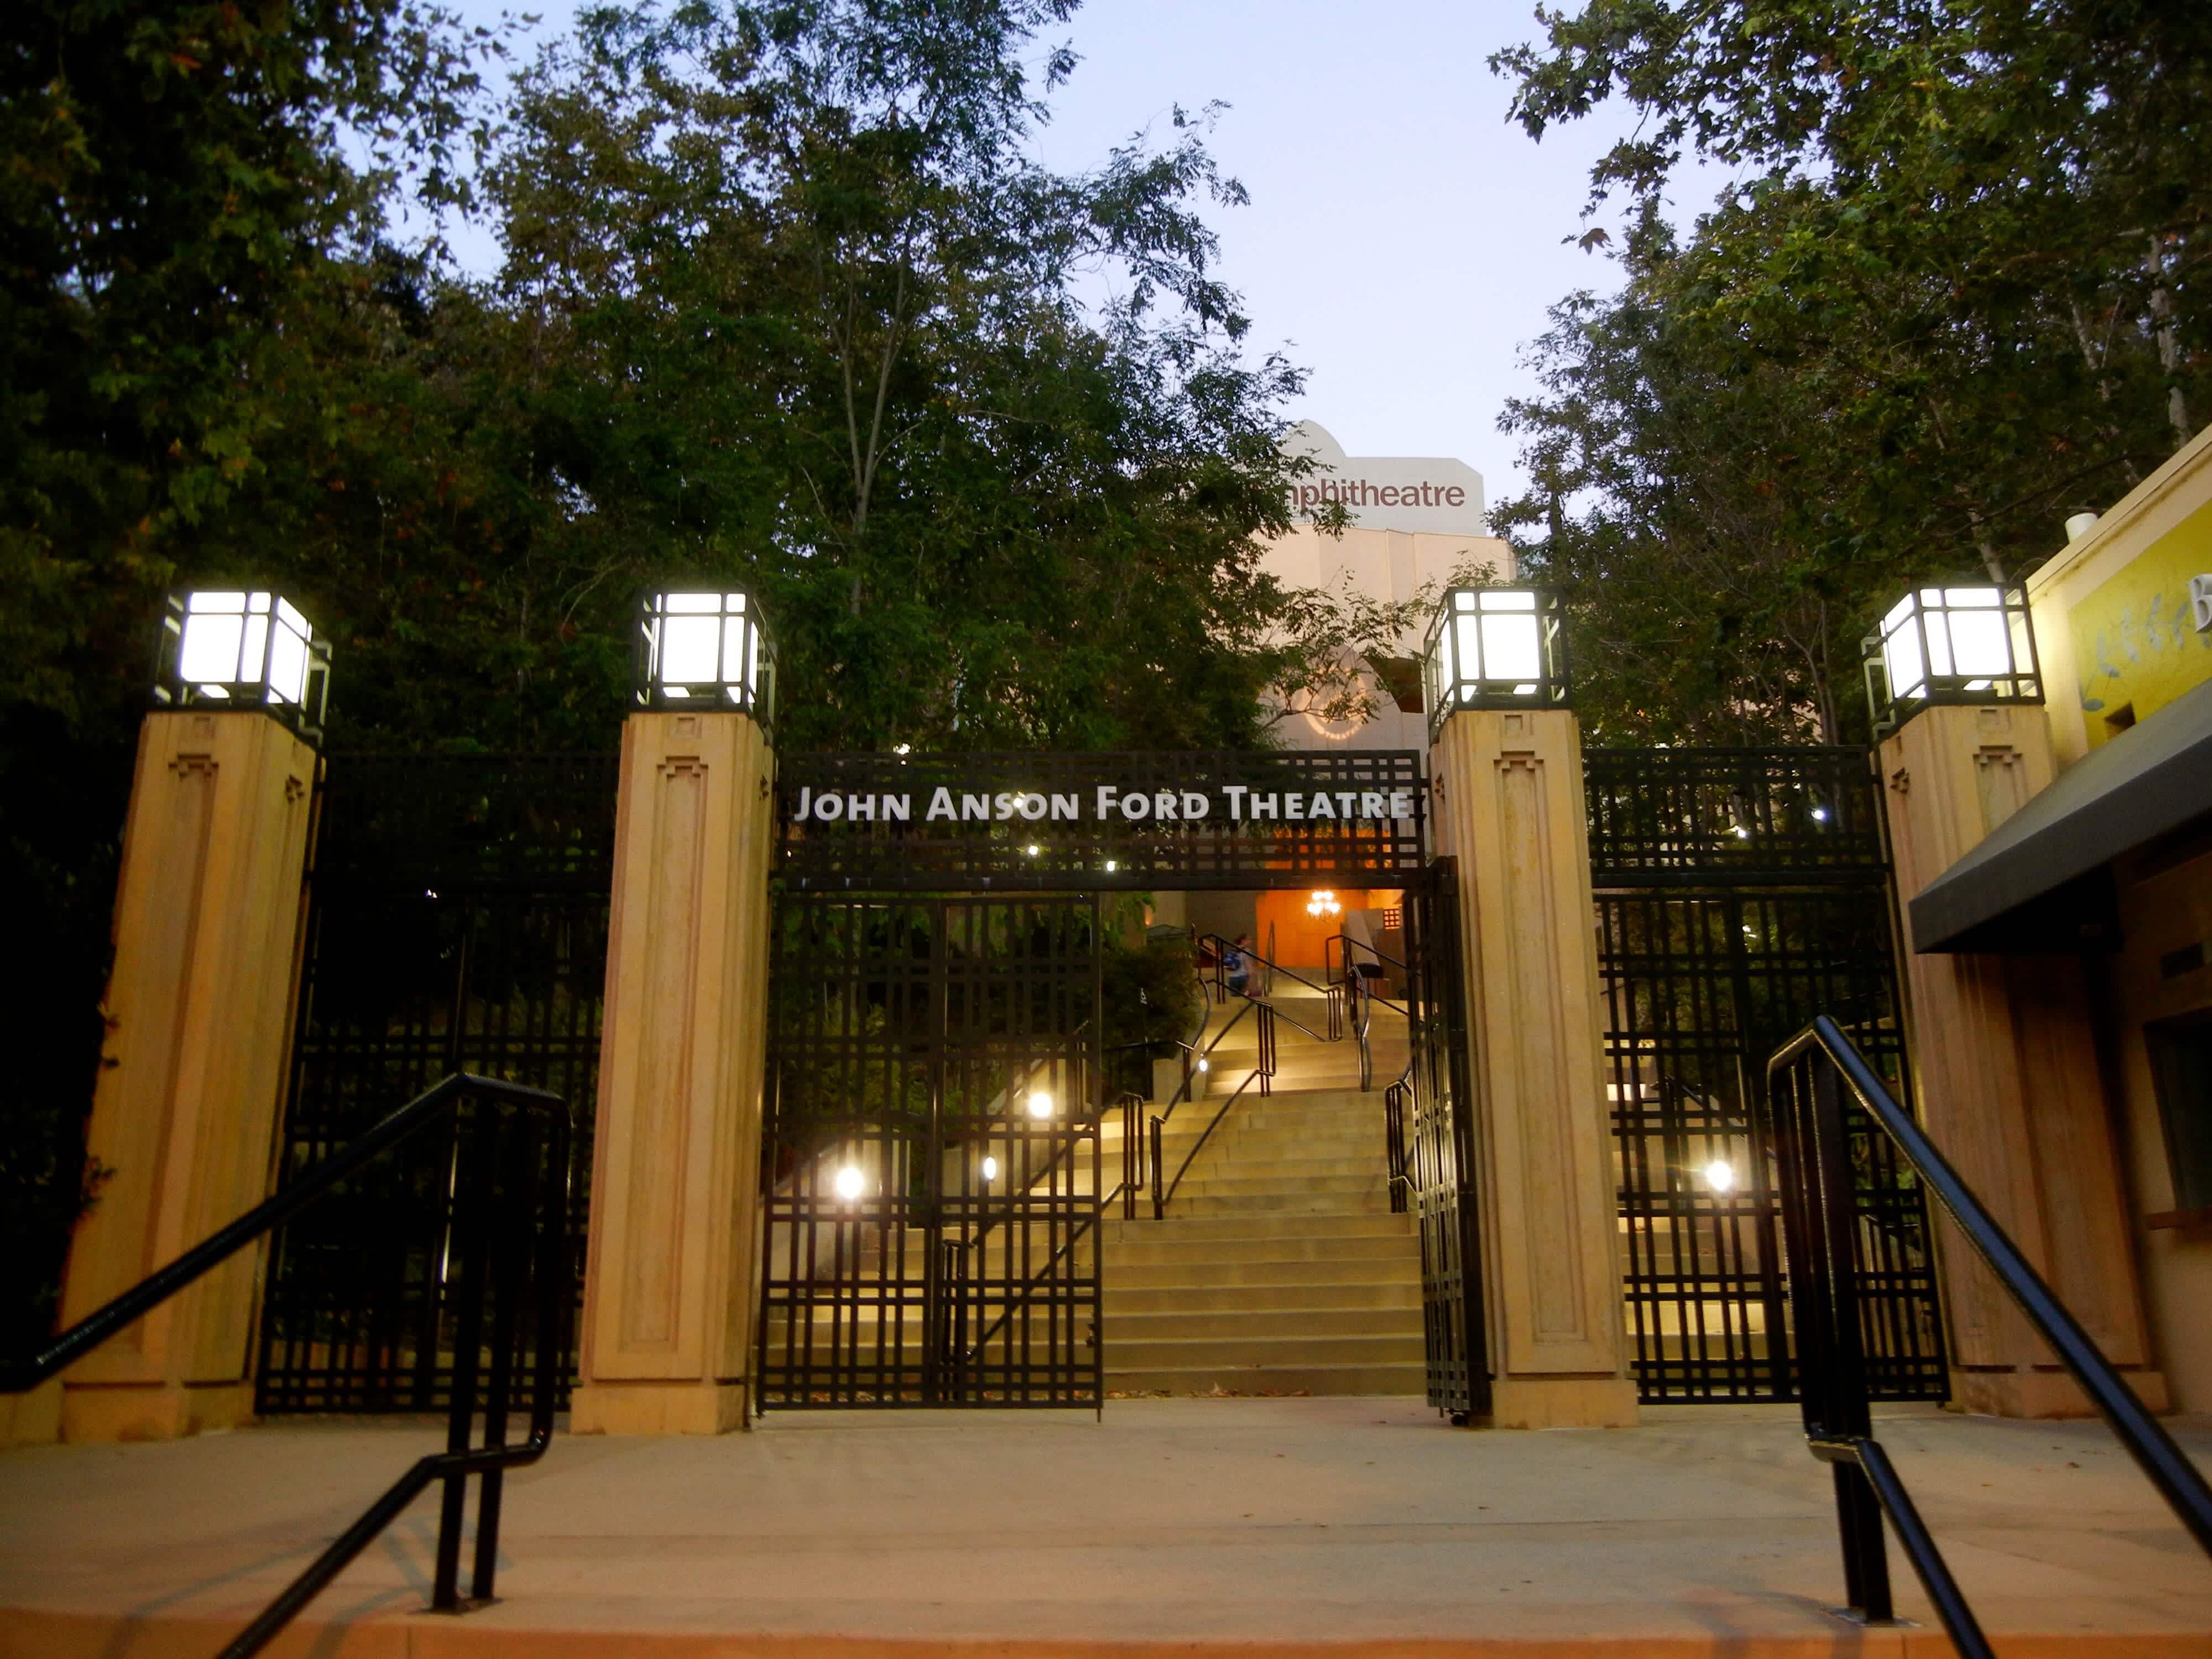 Entrance to the John Anson Ford Theatre, across Highland Avenue from the Hollywood Bowl